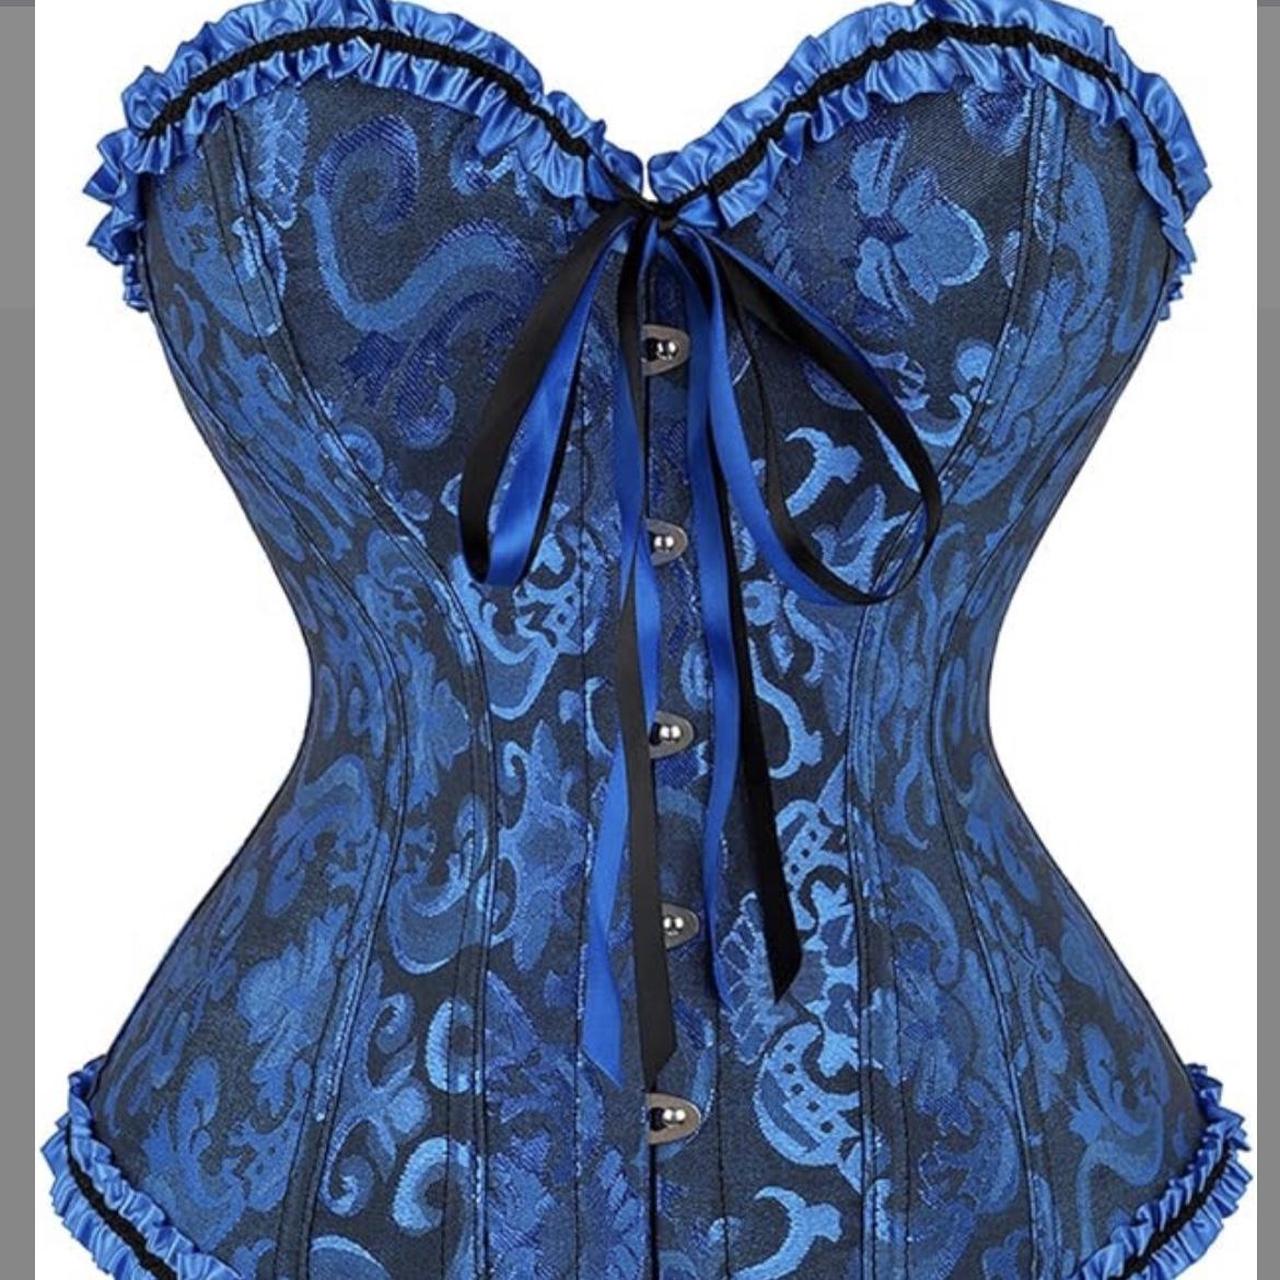 A Loves A Women's Blue and Black Corset (3)